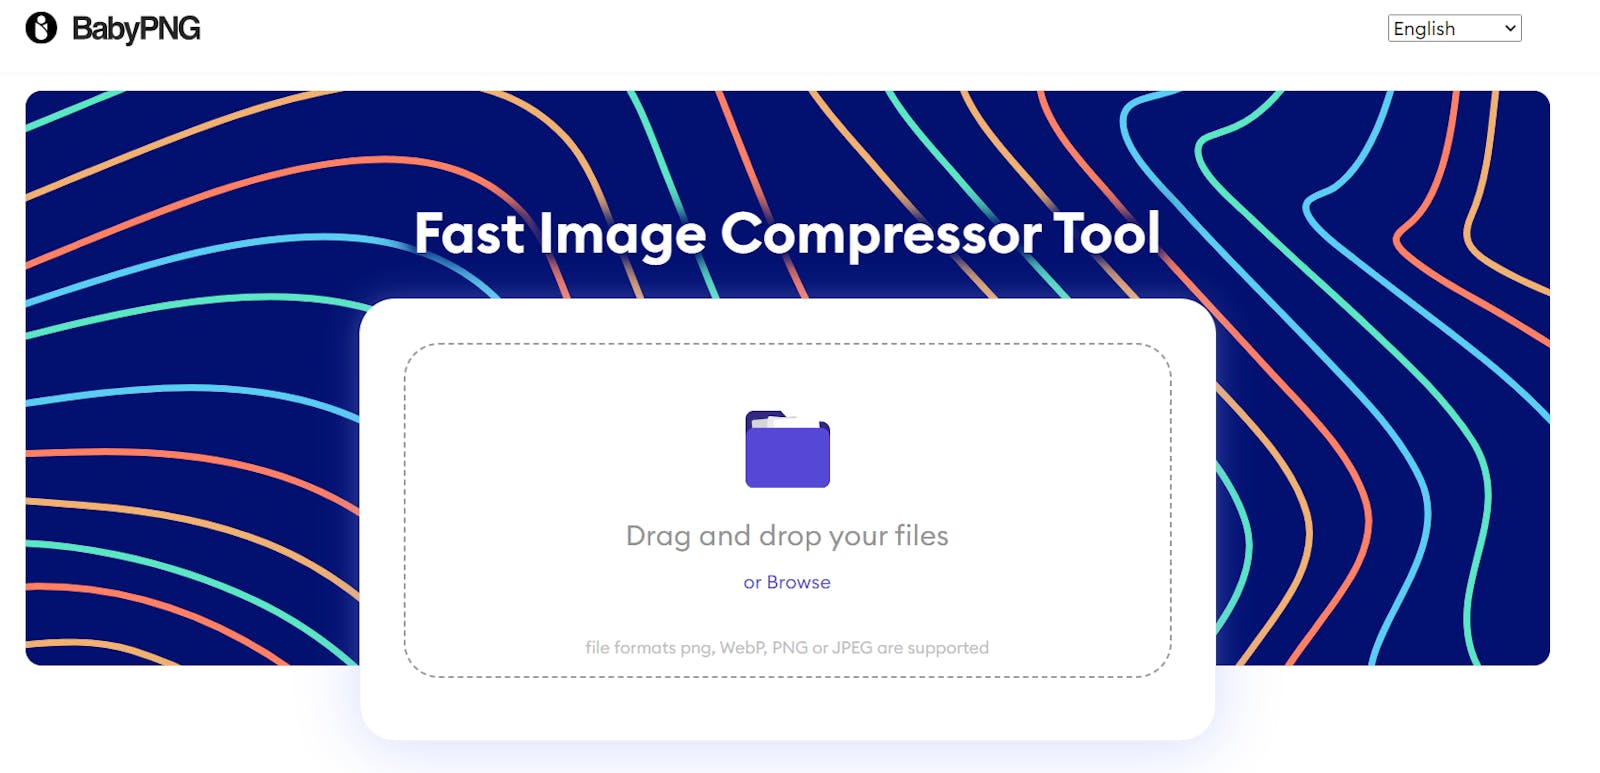 Easy Image Compression with BabyPNG